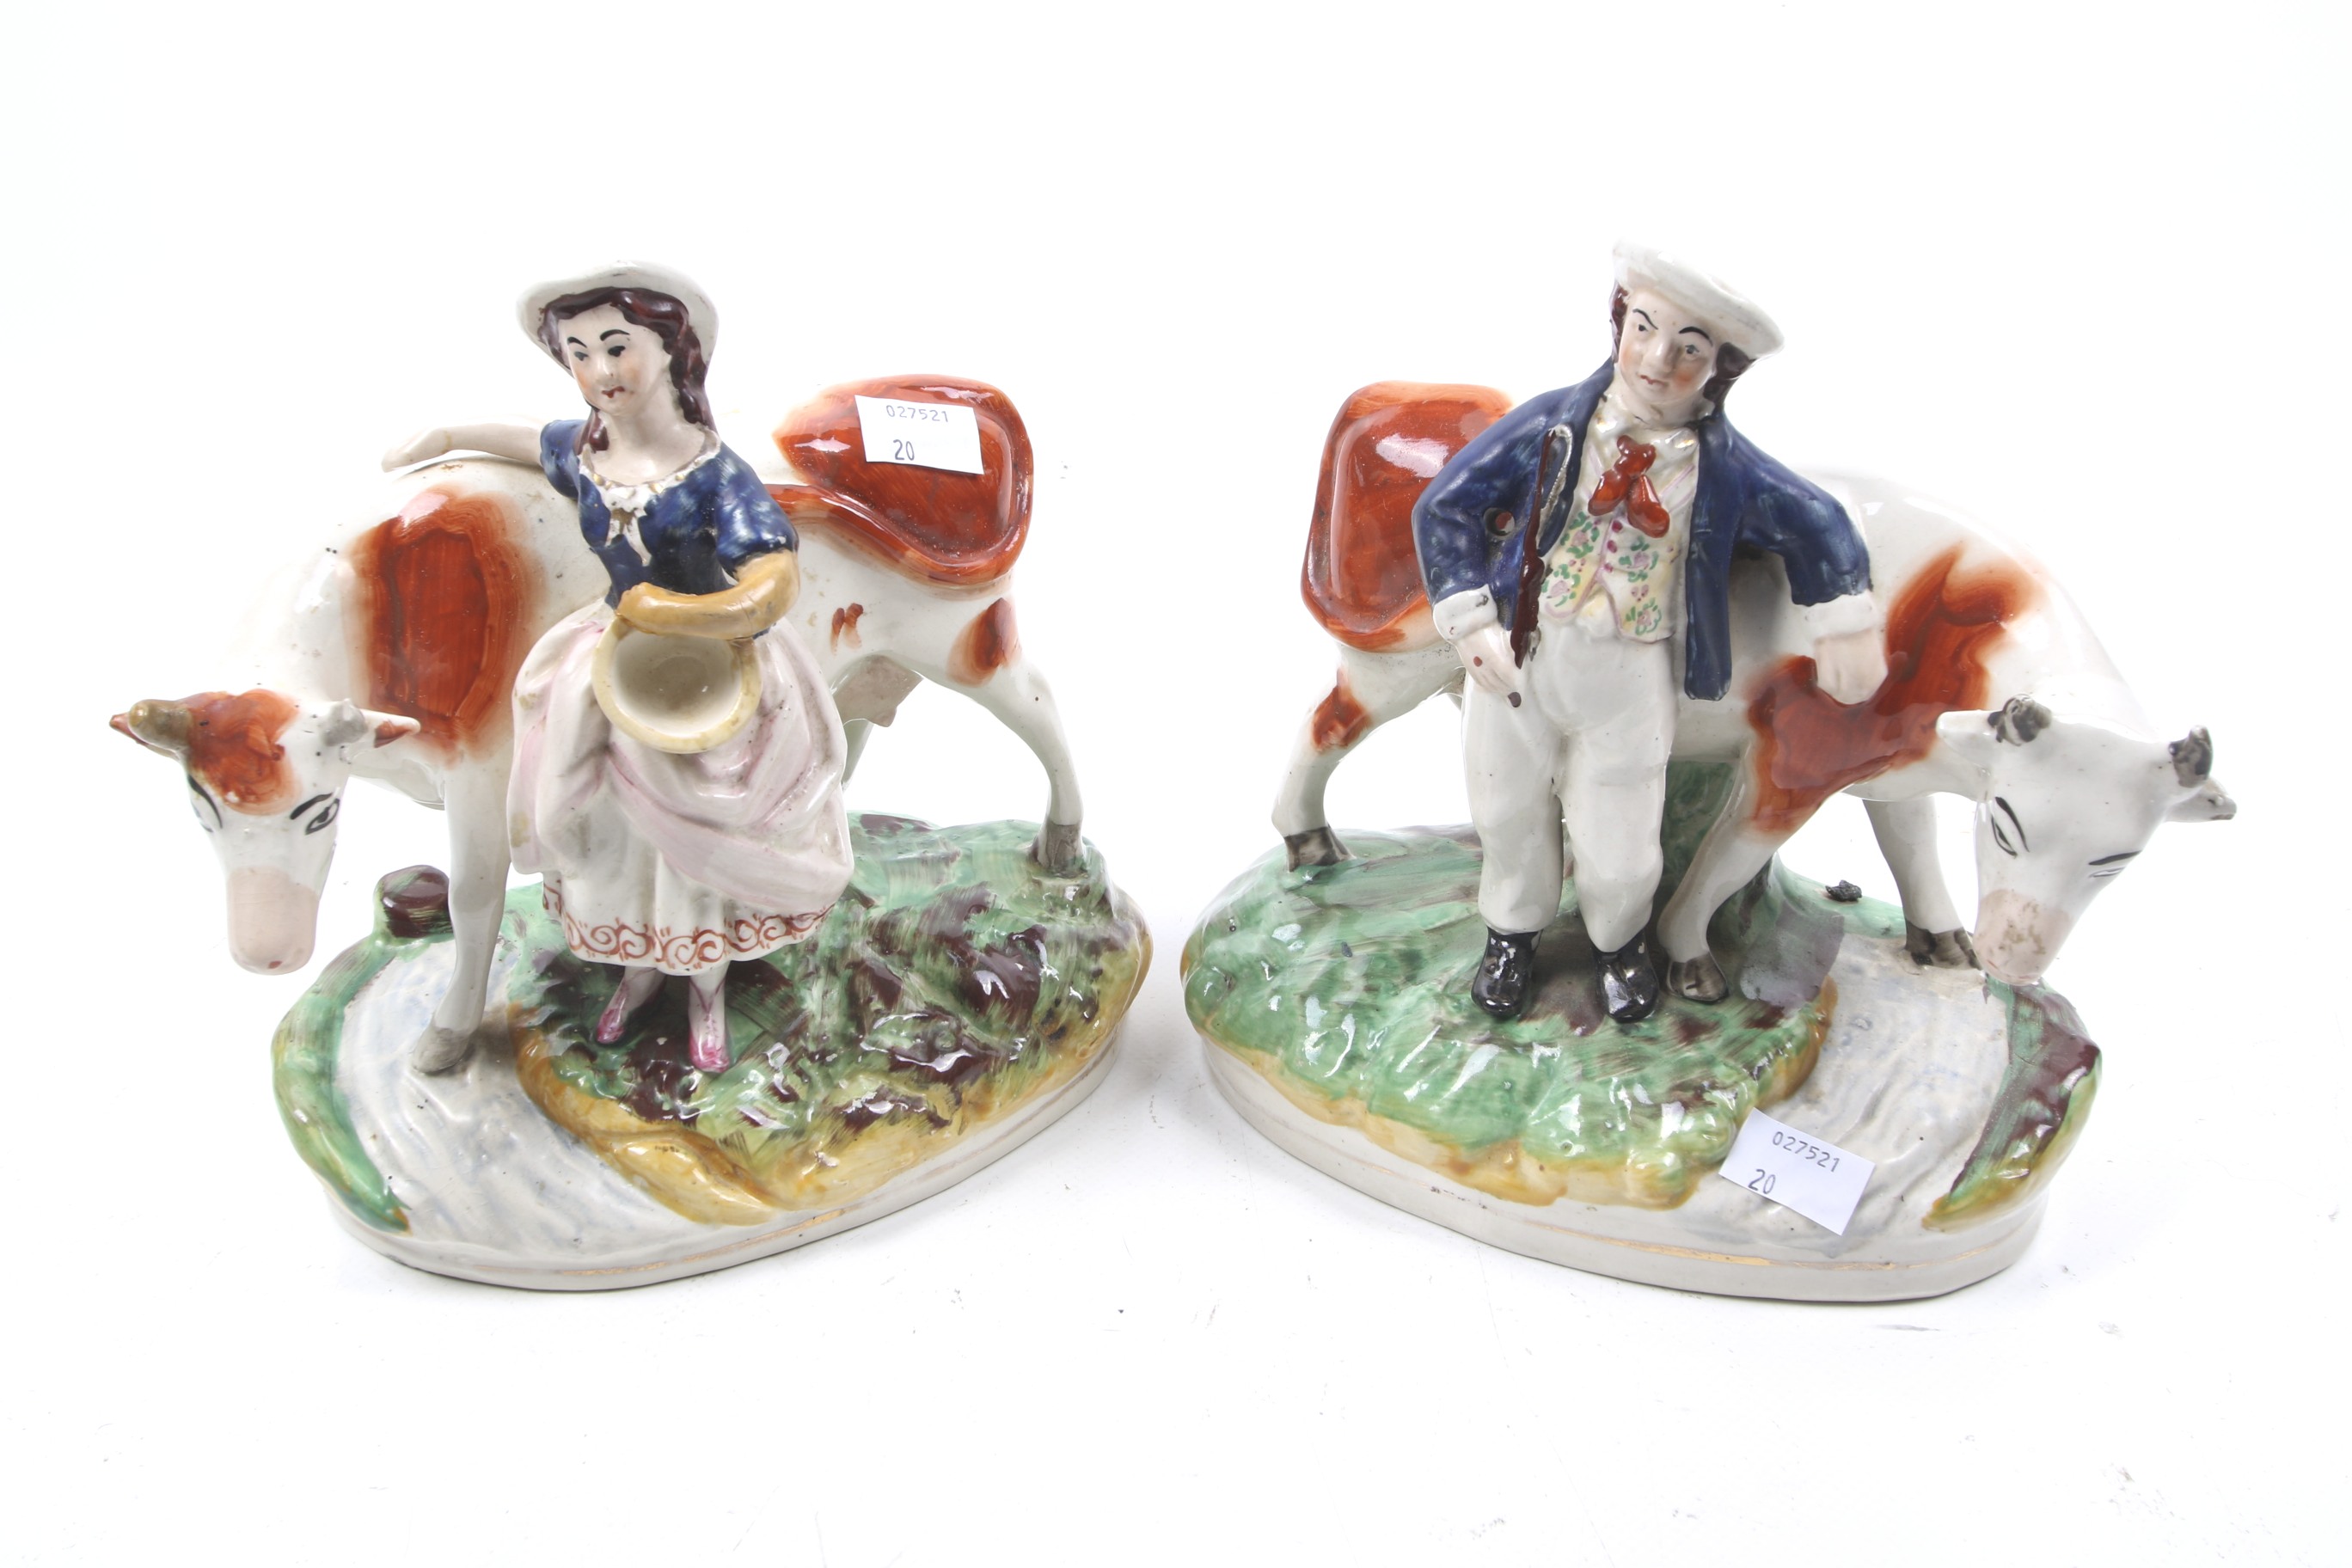 A pair of 19th century Staffordshire figures.